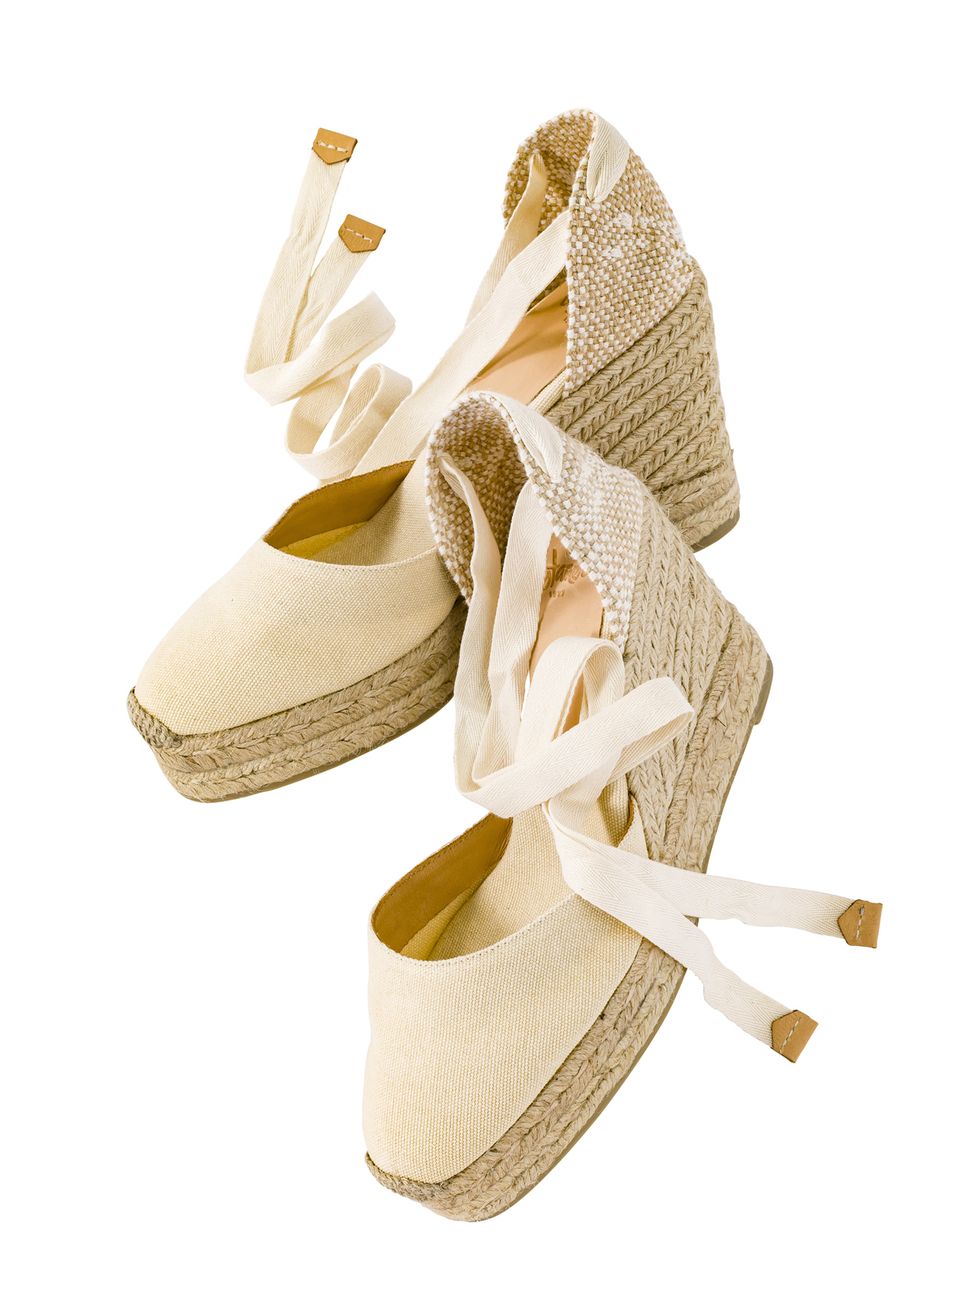 Product, White, Tan, Beige, Fawn, Wedge, Fashion design, Slingback, Thread, Knot, 